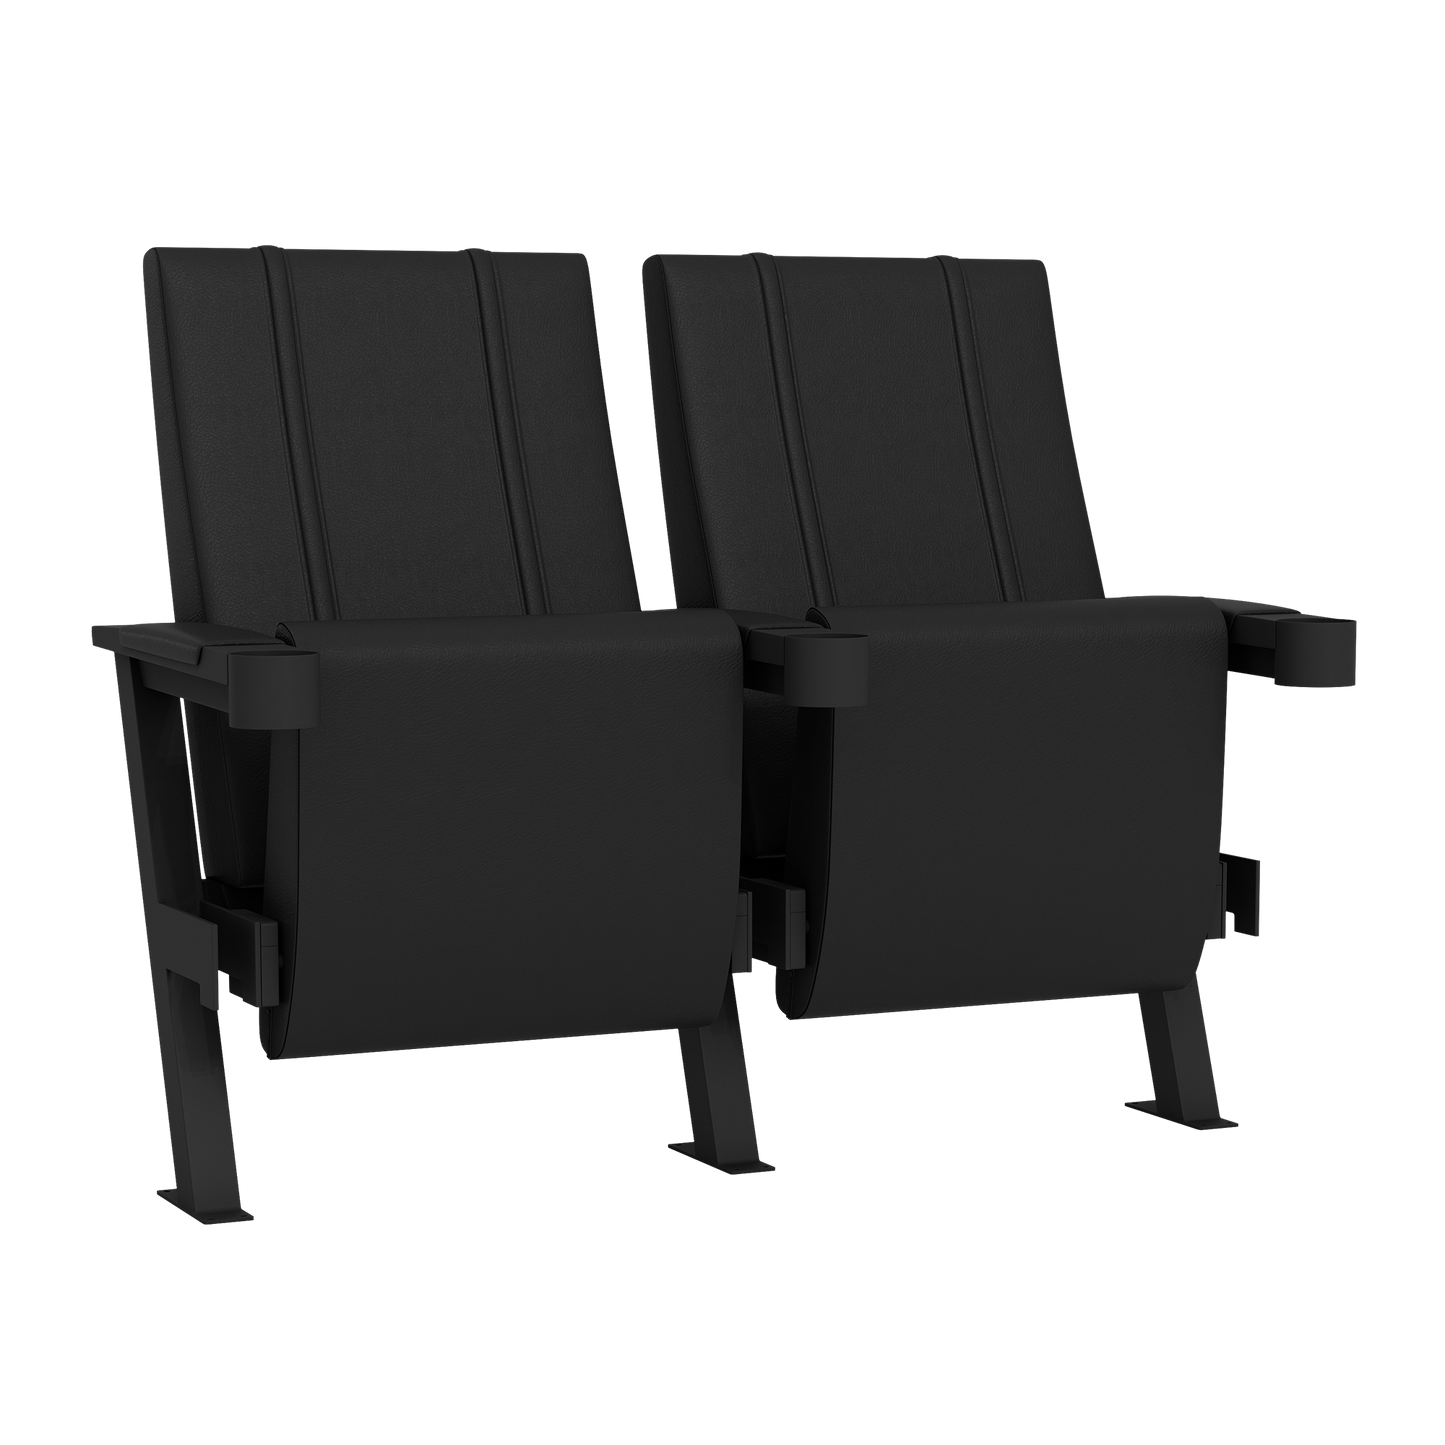 SuiteMax 3.5 VIP Seats with Golden State Warriors 2022 Champions Logo